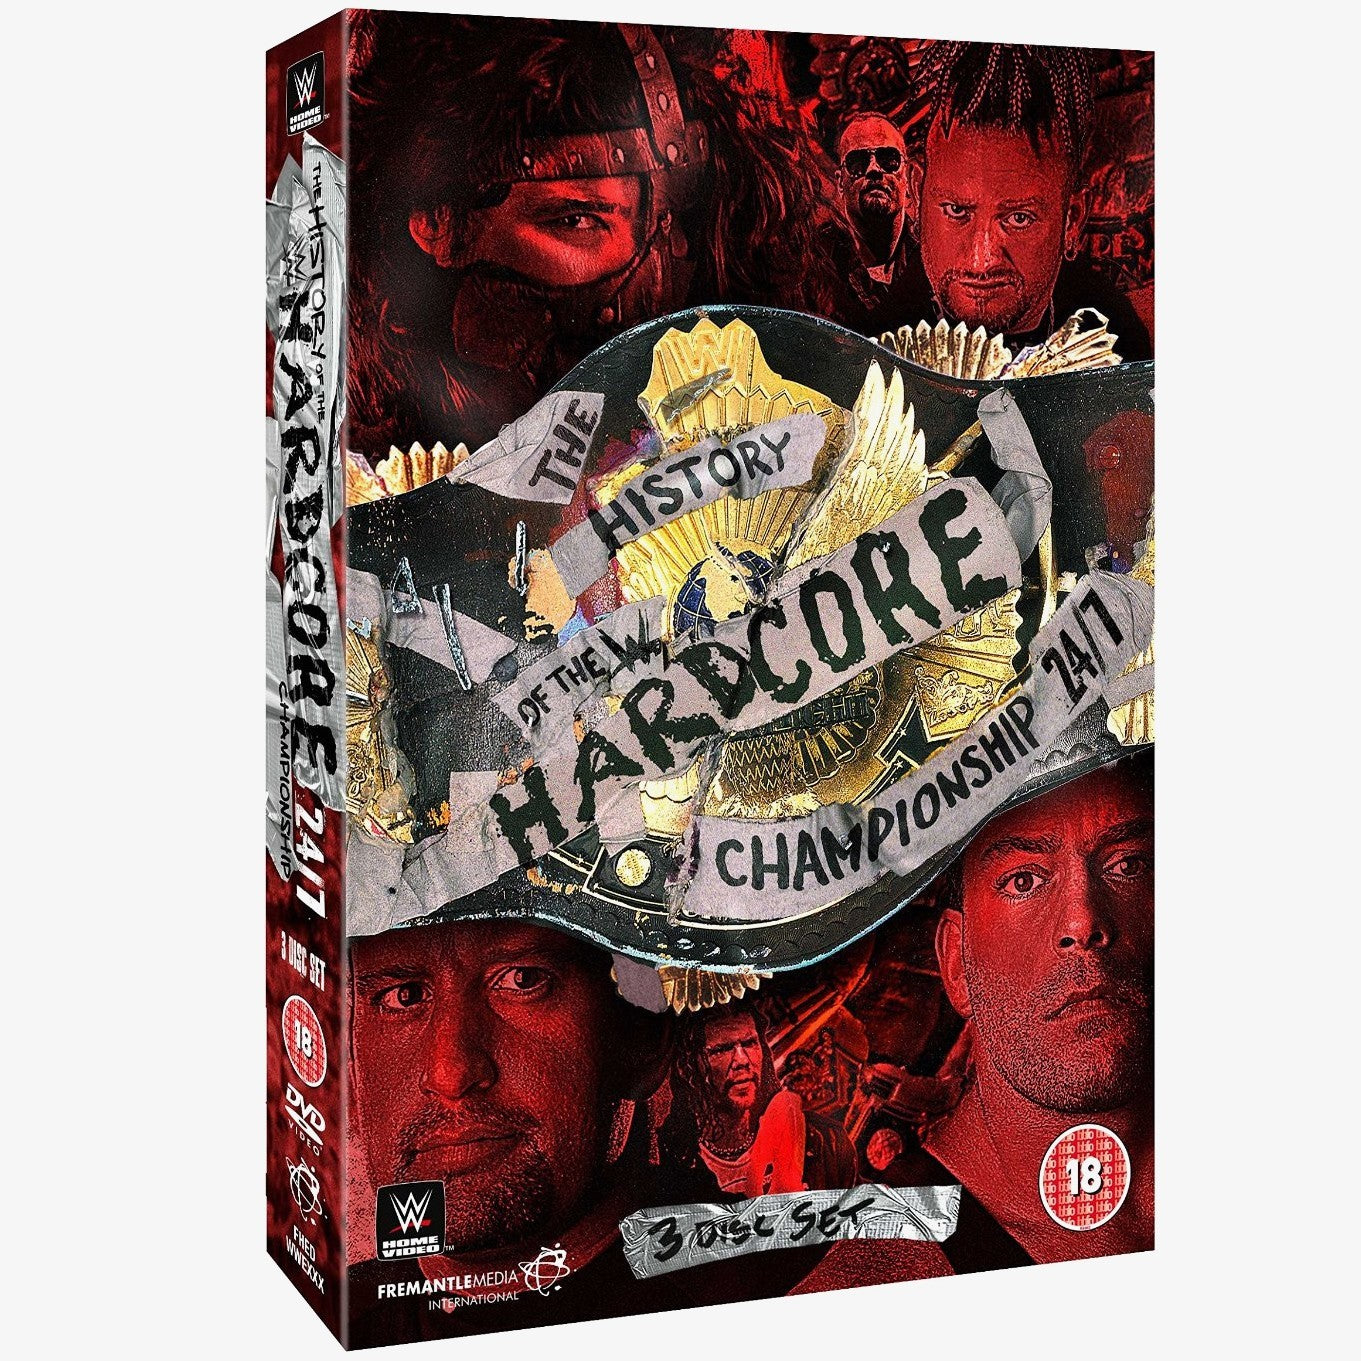 WWE - The History Of The Hardcore Championship 24:7 DVD